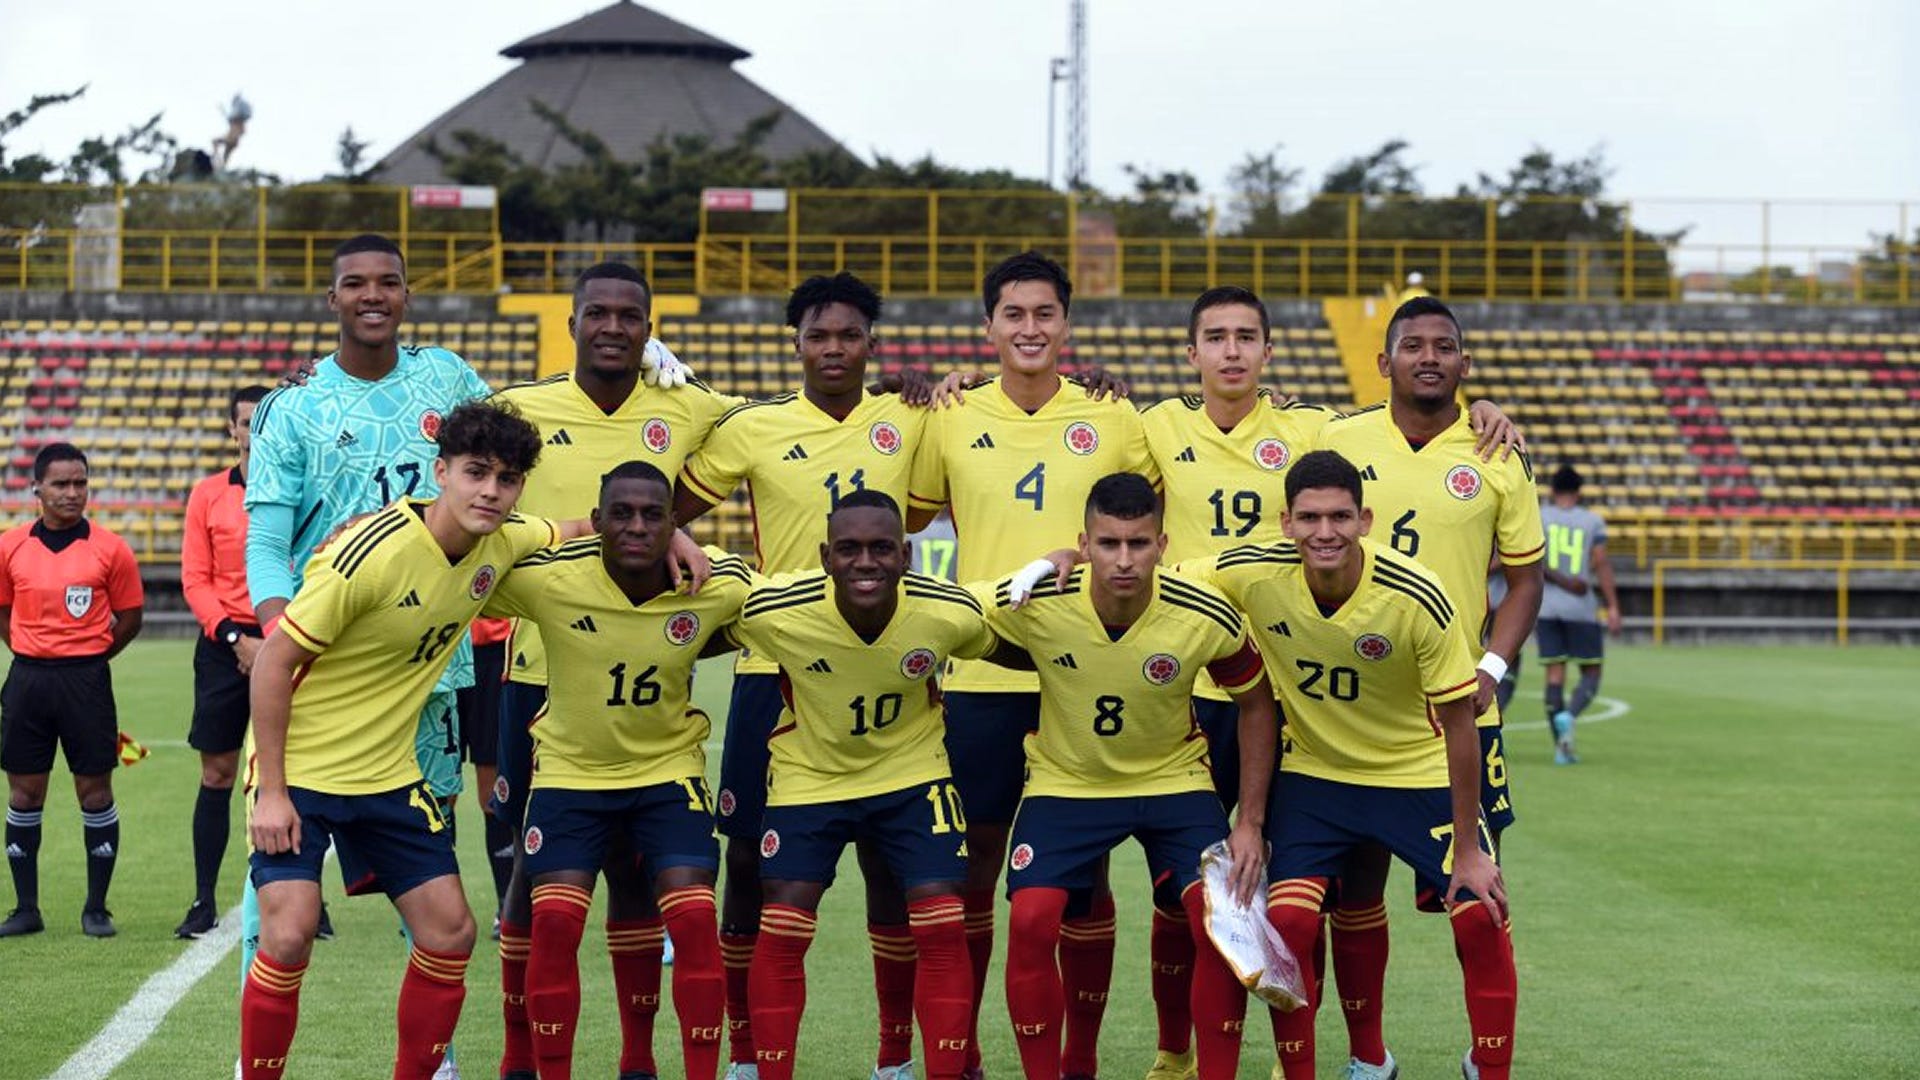 Colombia Sub 20 Selection Squad in the South American 2023, players